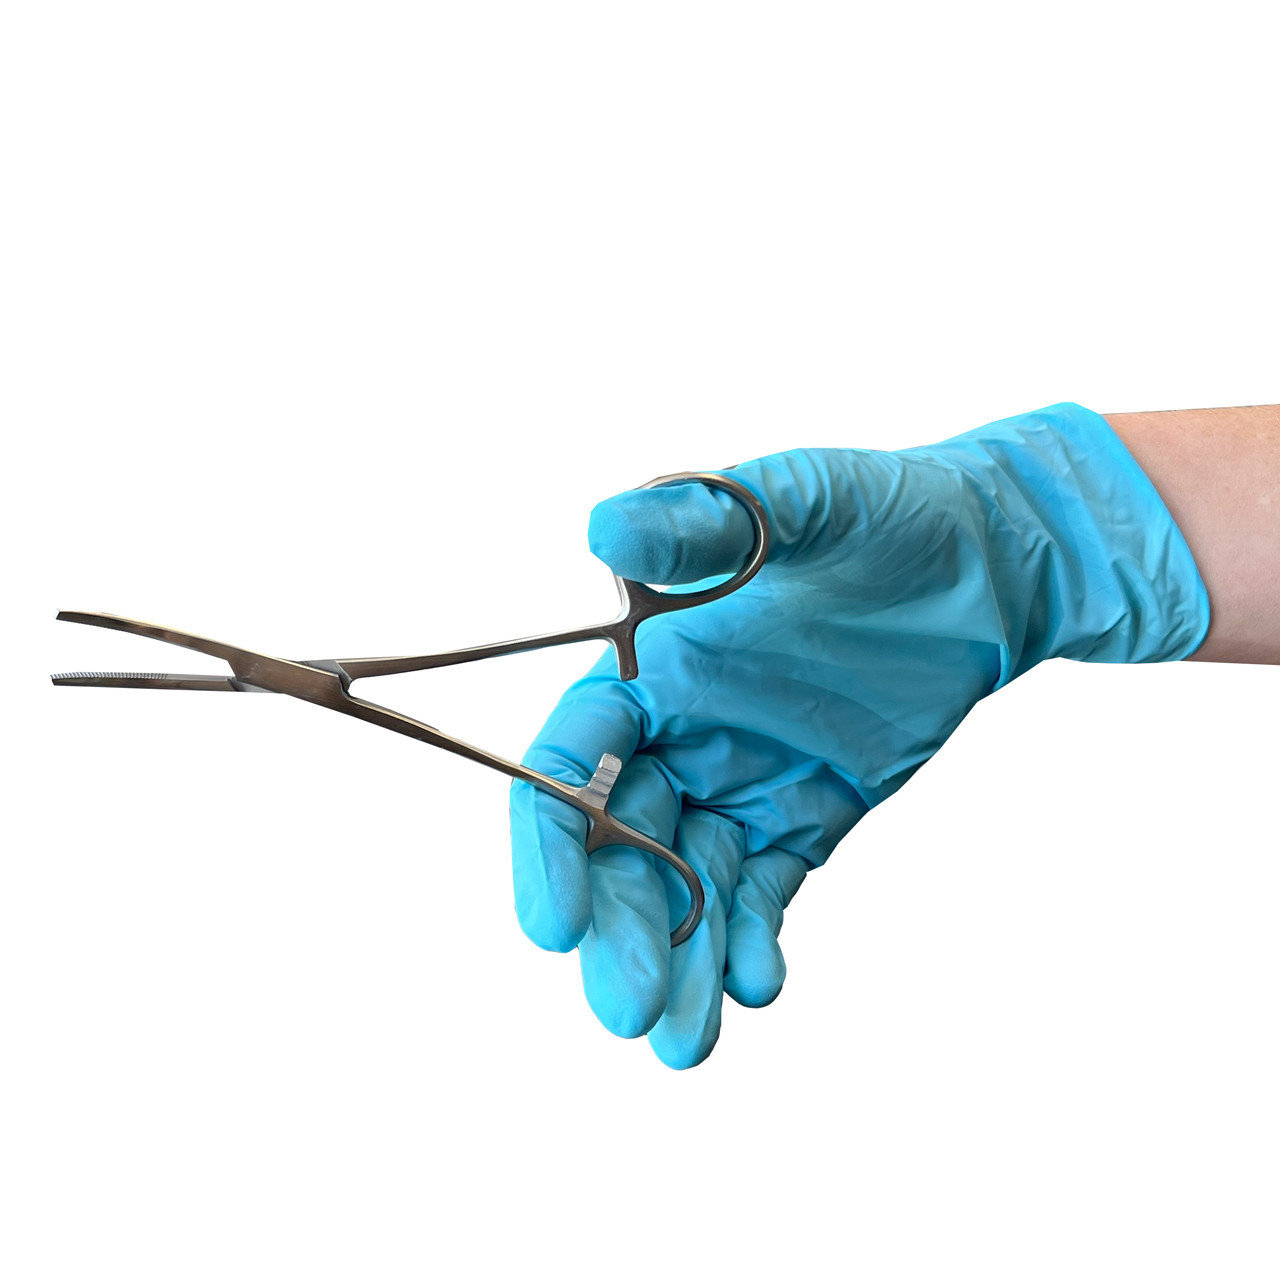 https://cdn11.bigcommerce.com/s-rd4j7/images/stencil/1280x1280/products/2641/15146/30-0158---Ten-Rolled-Pairs-Blue-Nitrile-Gloves---with-shears---LORes__17205.1651497698.jpg?c=2